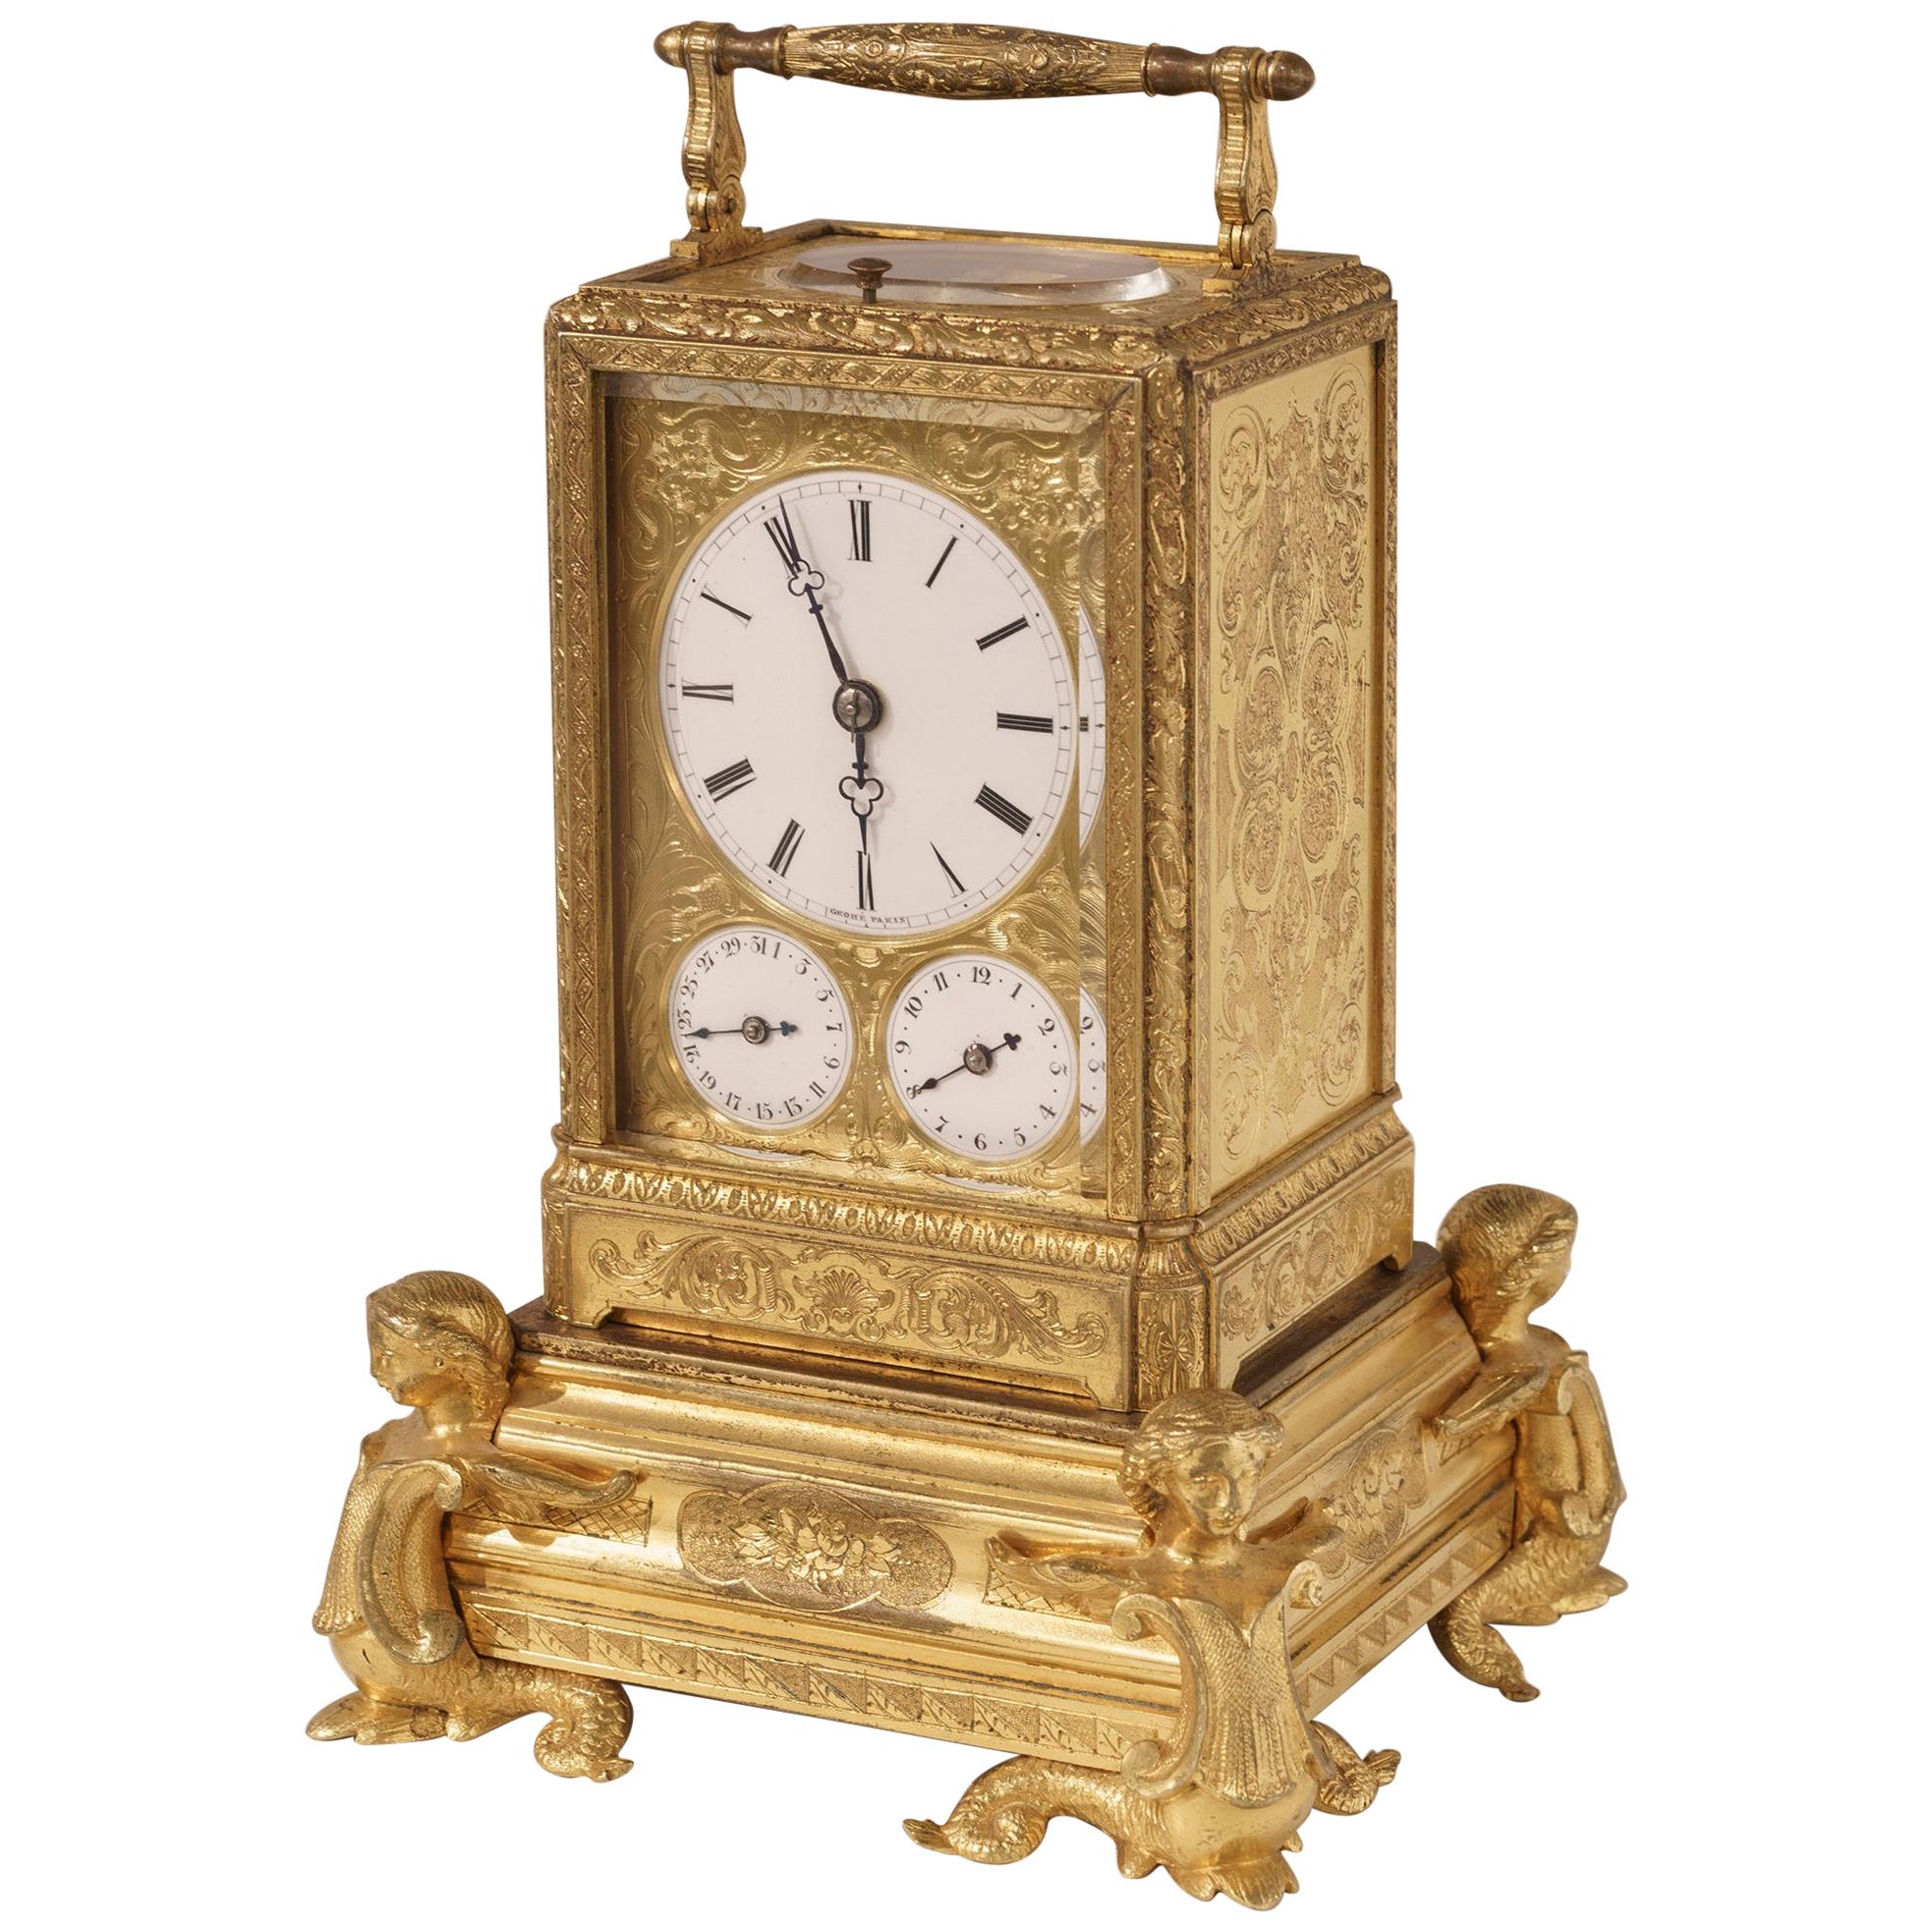 19th Century French Petite Sonnerie Ormolu Carriage Clock by Grohé with Calendar